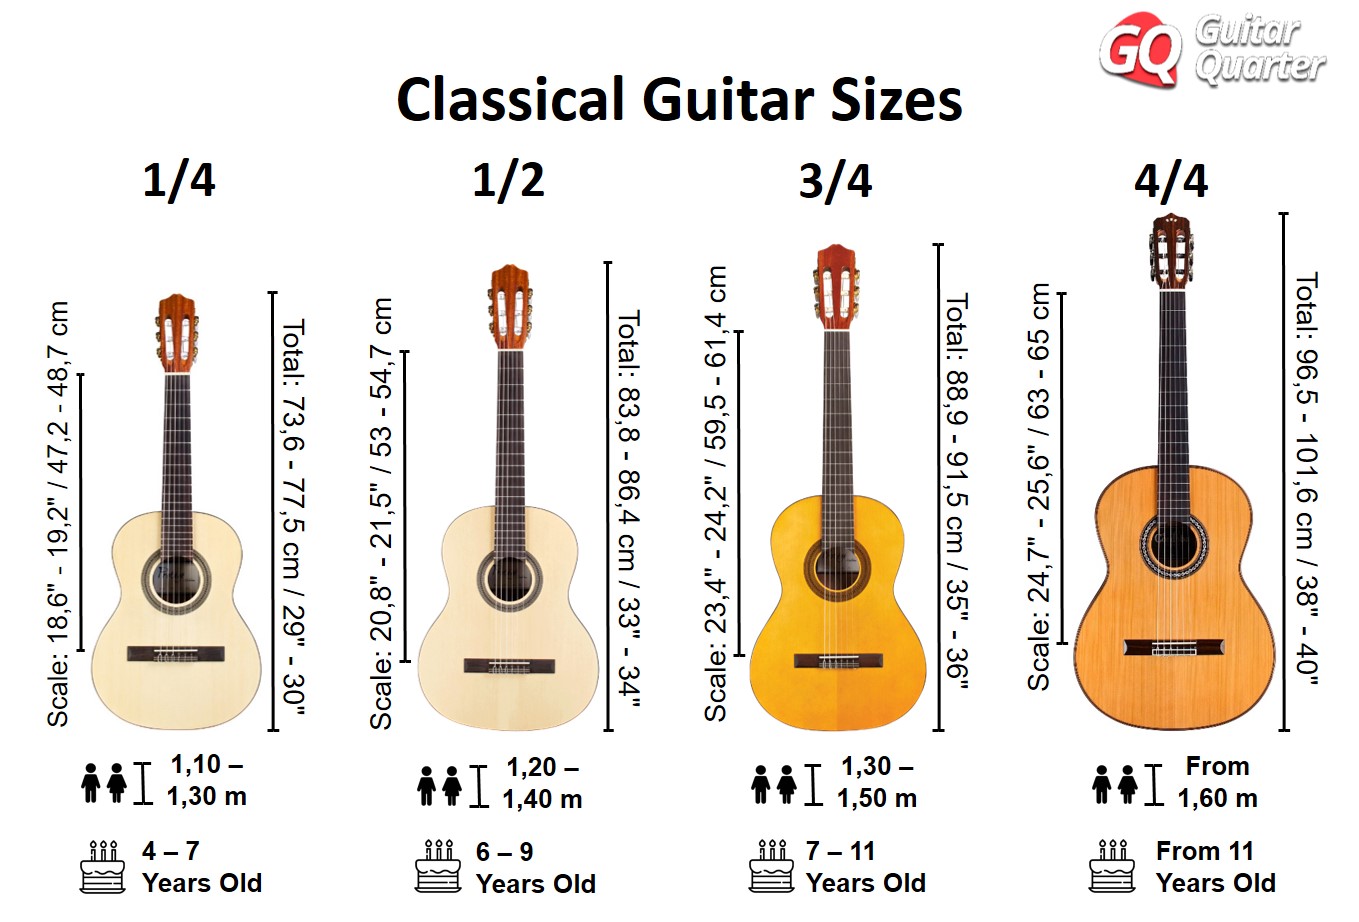 Standard-Classical-Spanish-Guitar-Sizes-Age-Years-Height-Total-Scale-Length-GuitarQuarter.jpg